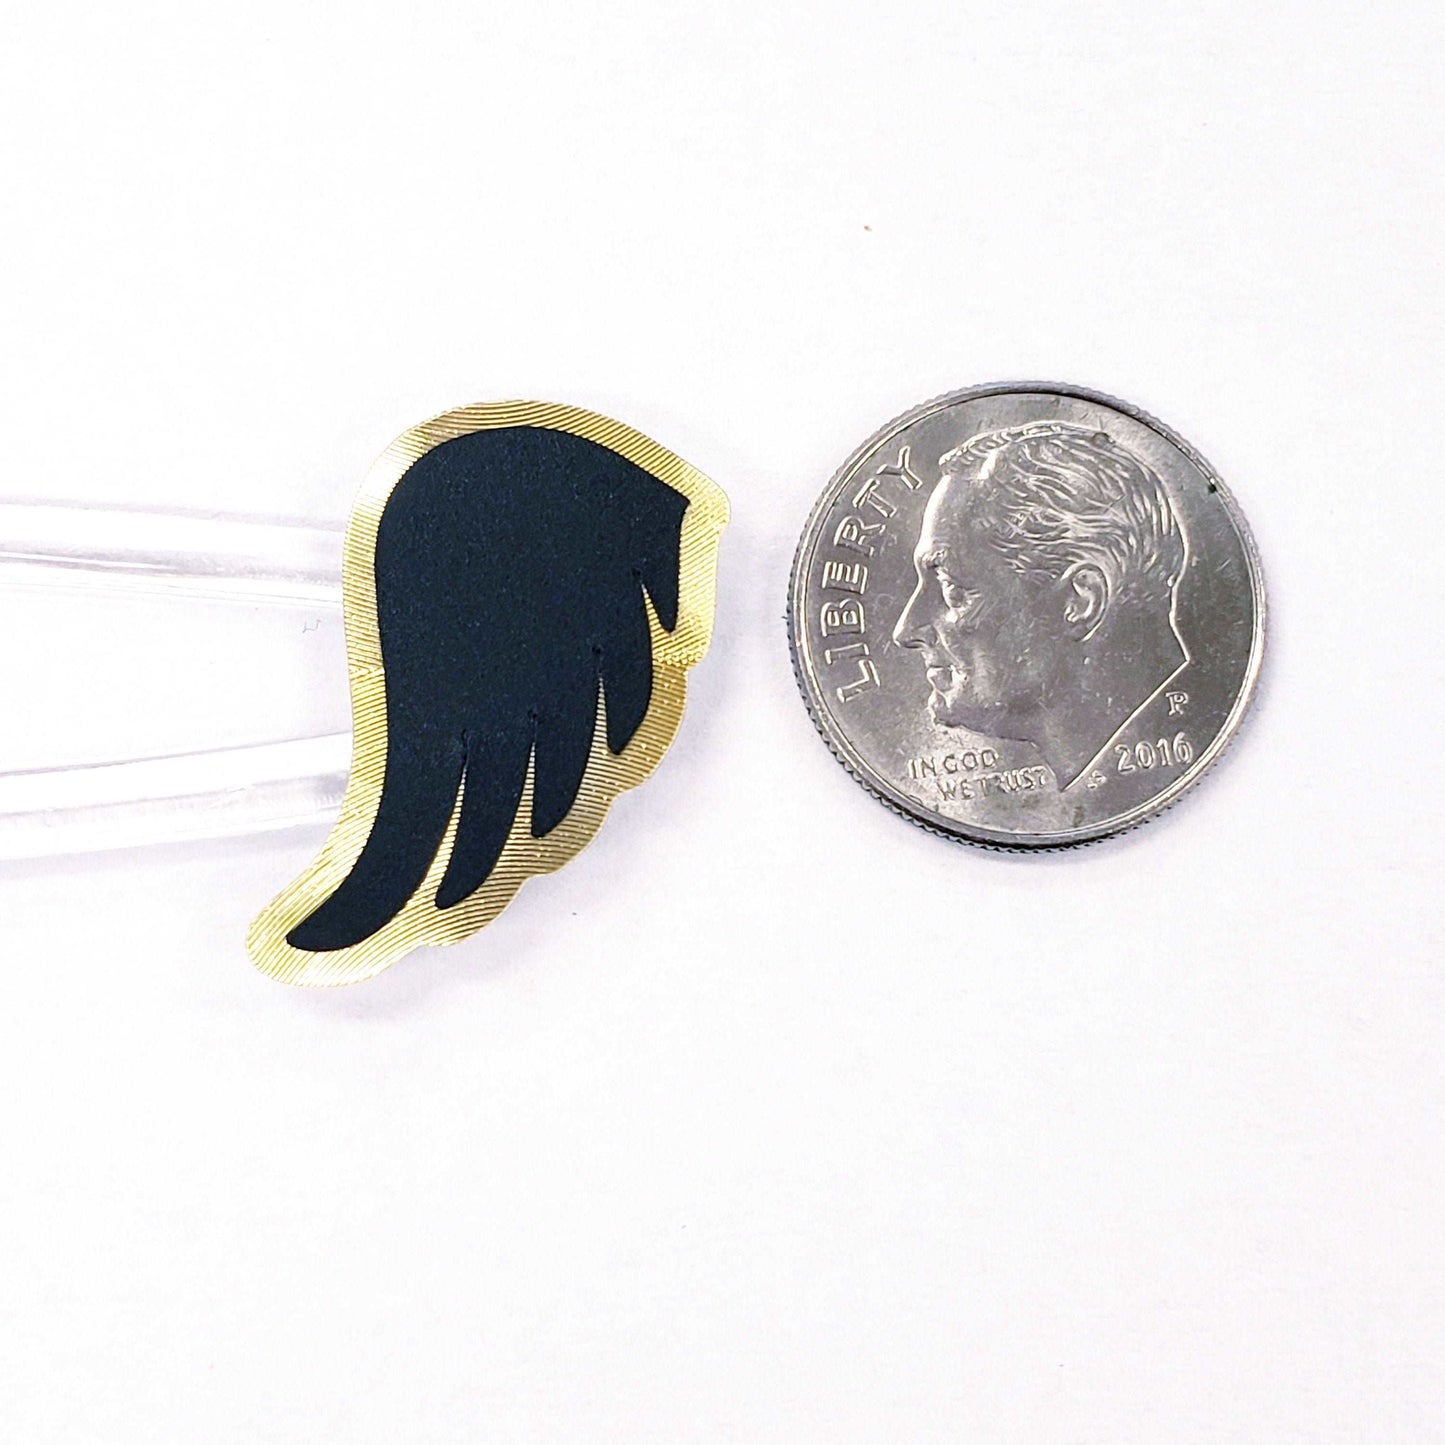 Black Angel Wing Stickers, set of 42 black and gold wing stickers for invitations, envelopes, memorial cards, planners, journals and crafts.